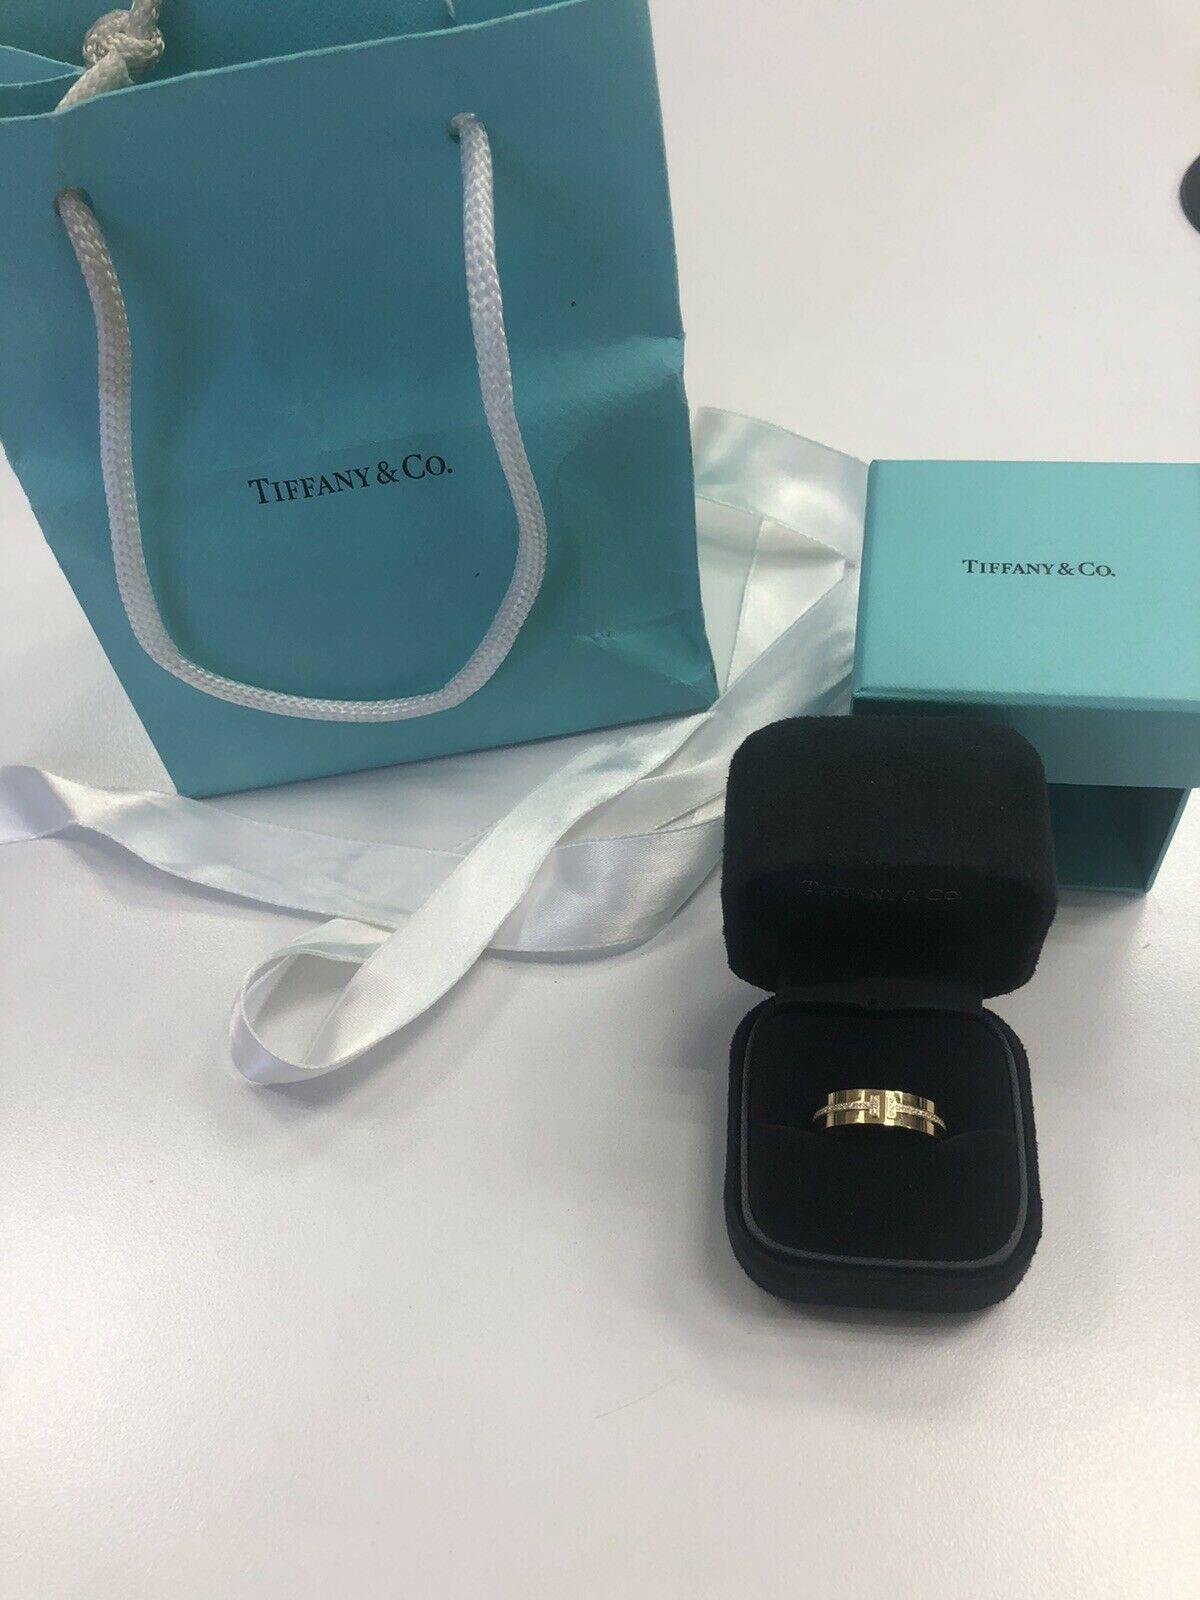 Tiffany & Co 18k Yellow Gold Round Diamond T Shaped Band
Ring Size 7.25
7.8 Grams
 White Round Brilliant Cut Diamonds 0.12 Carats Total Weight
Color: F
Clarity: VS2

This is a beautiful Tiffany & Co. diamond band that shows off these round diamonds.